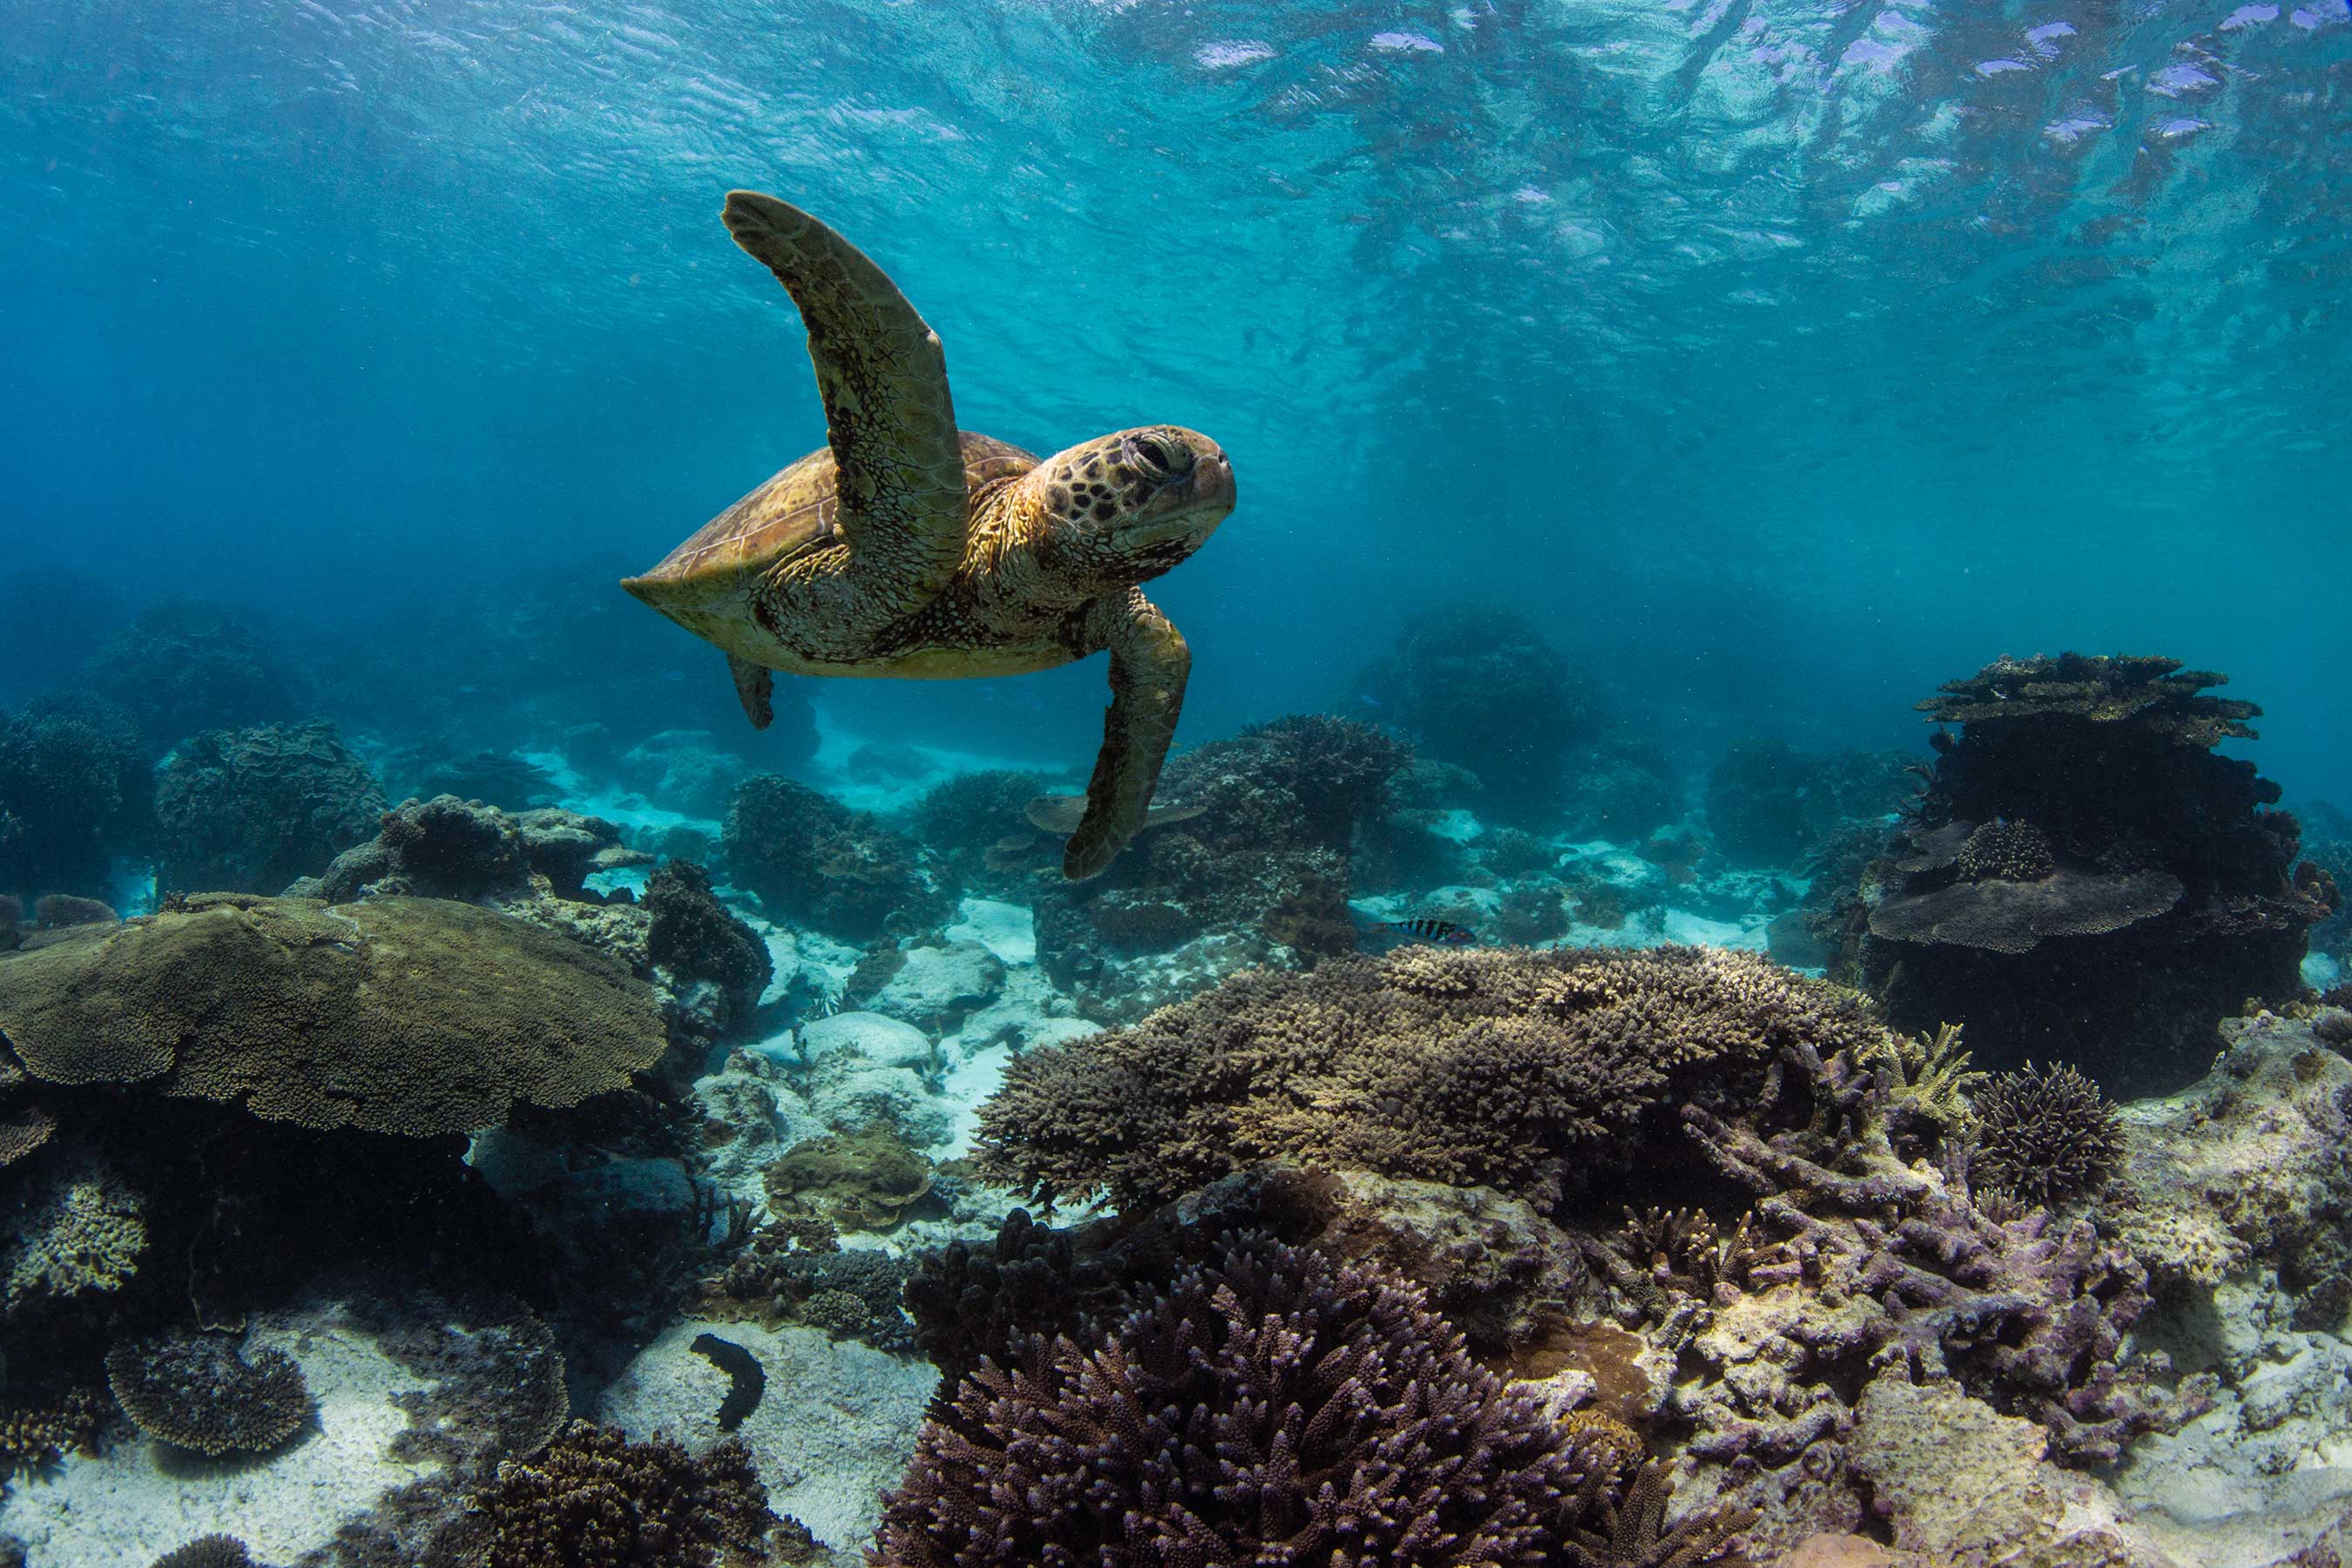 A turtle swimming over a healthy coral reef on the Great Barrier Reef, Lady Elliot, December 2016.  The Ocean Agency / XL Catlin Seaview Survey / Richard Vevers